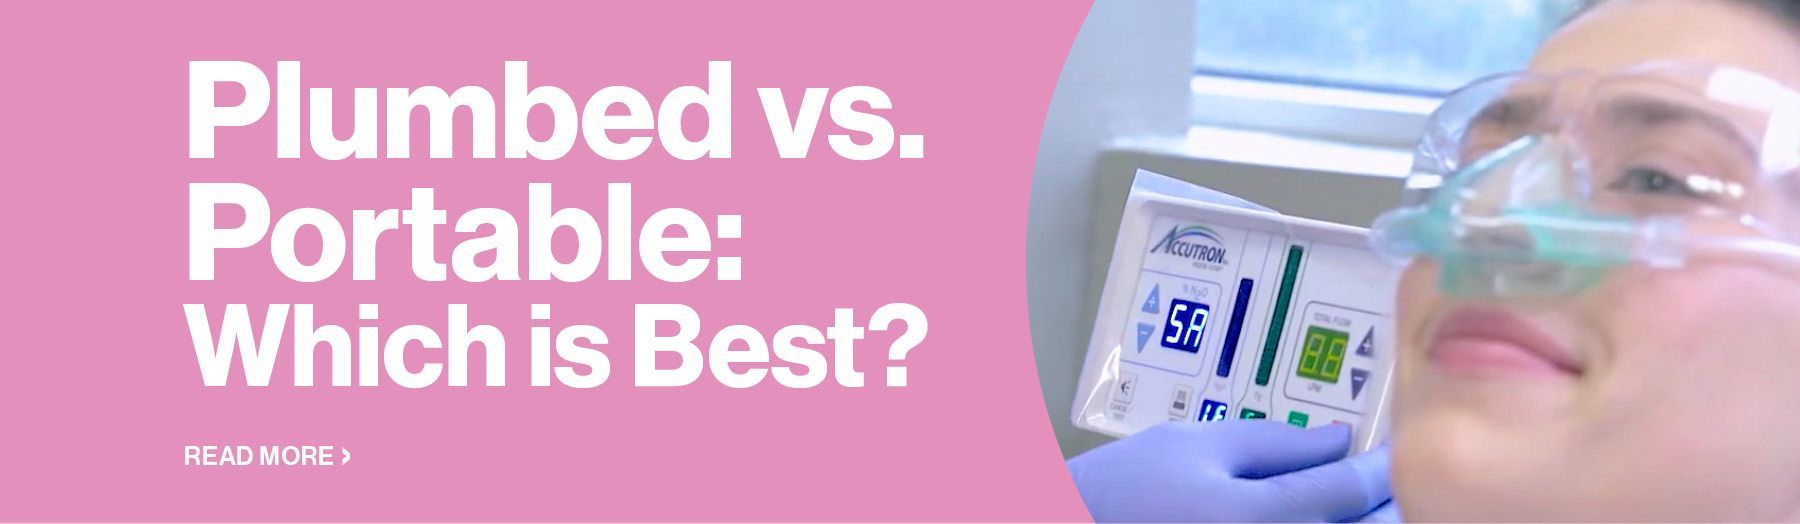 Plumbed vs. Portable: Which is best?